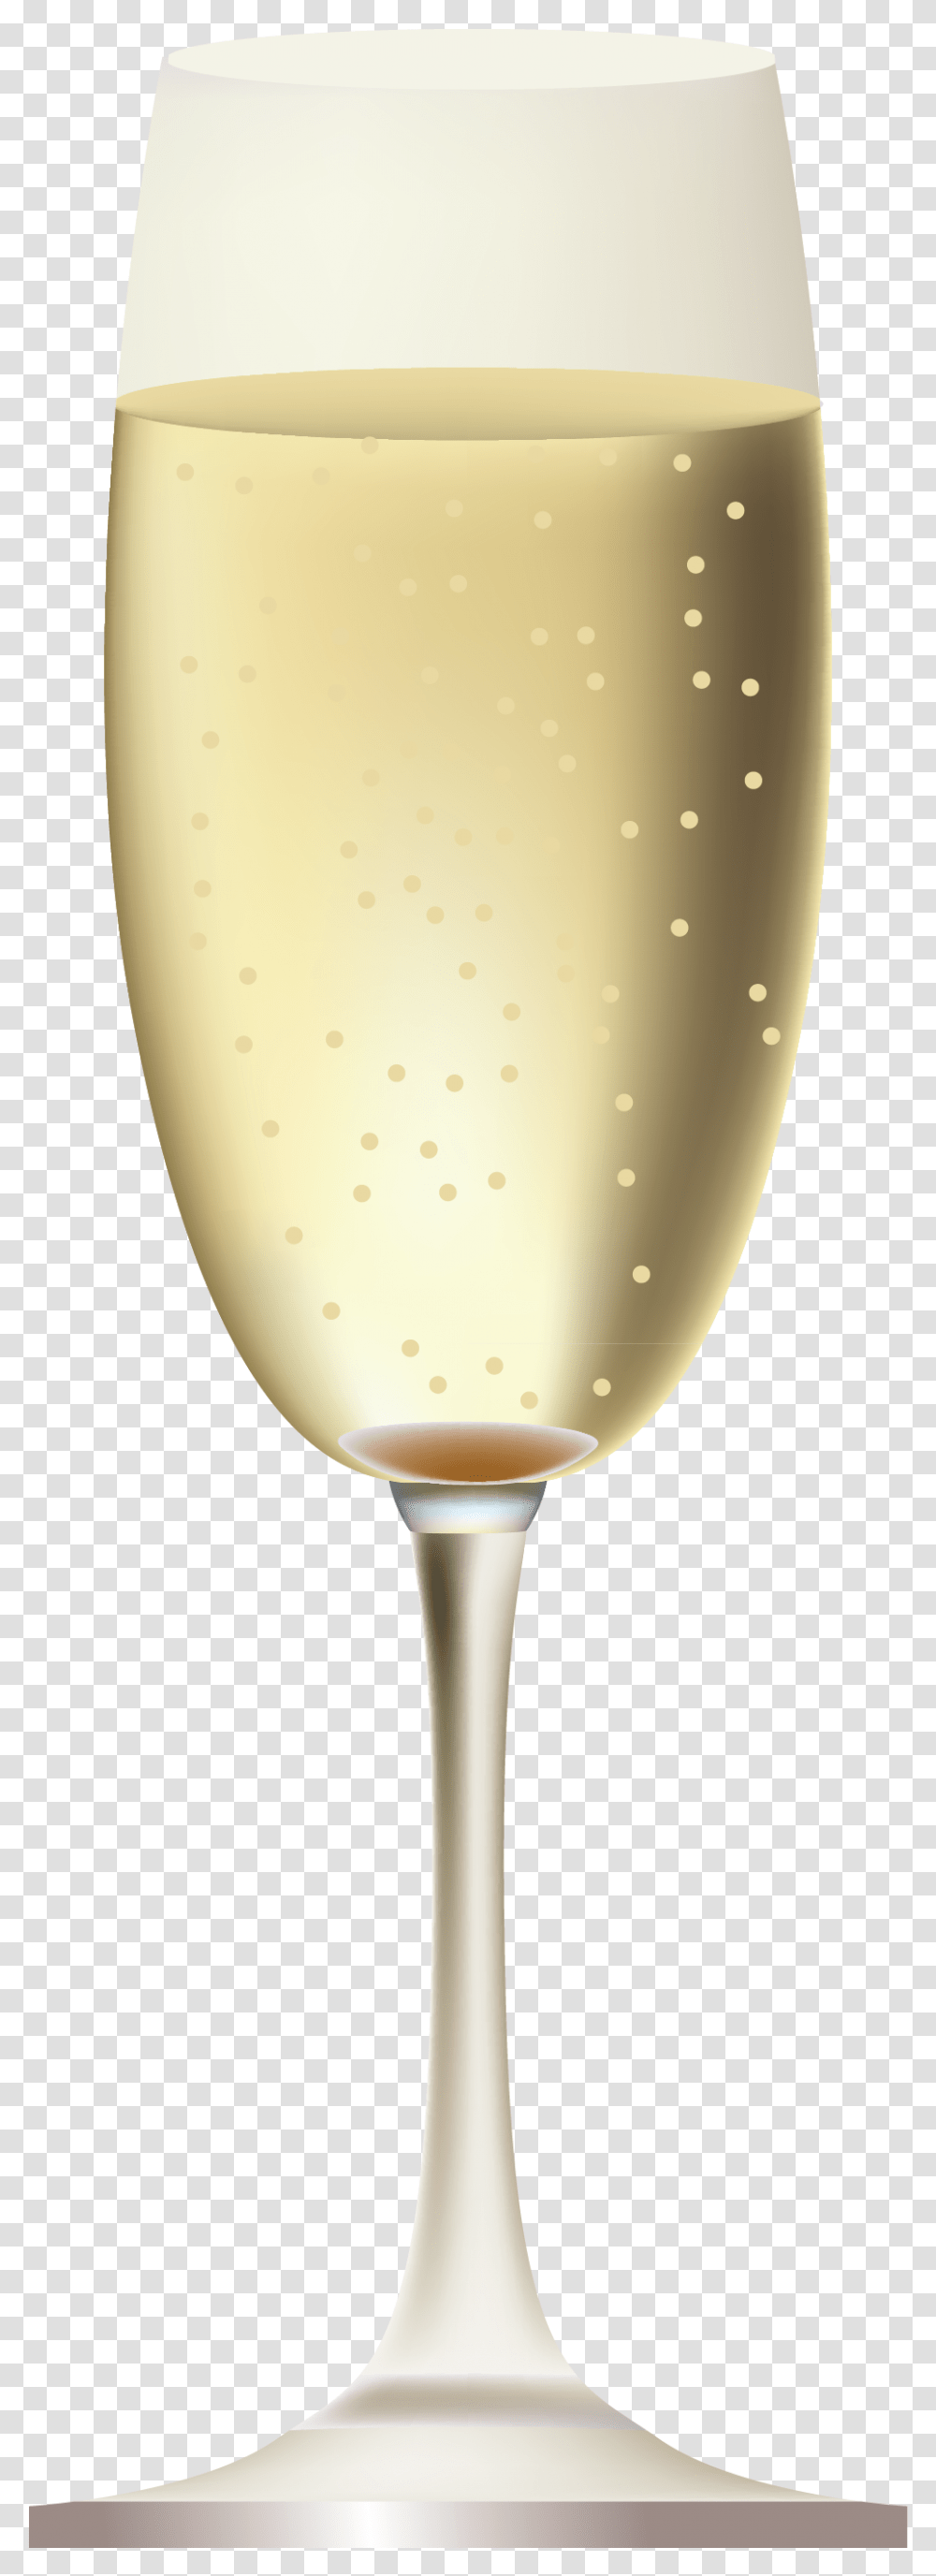 Champagne Glass Wine Glass, Lamp, Alcohol, Beverage, Drink Transparent Png